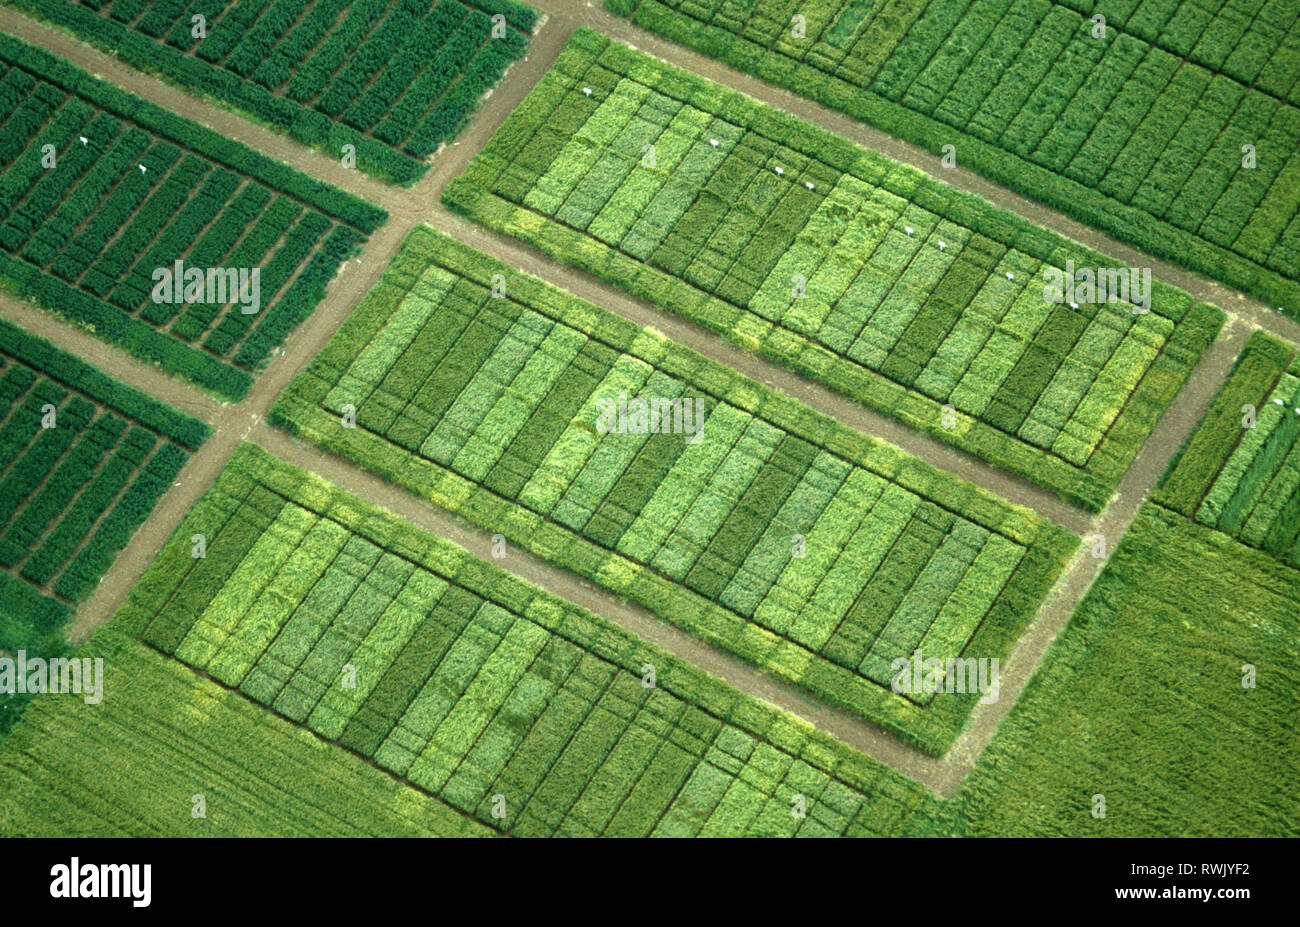 Aerial view of cereal crop variety trials plots to test differences between varieties, yield, disease resistance Stock Photo